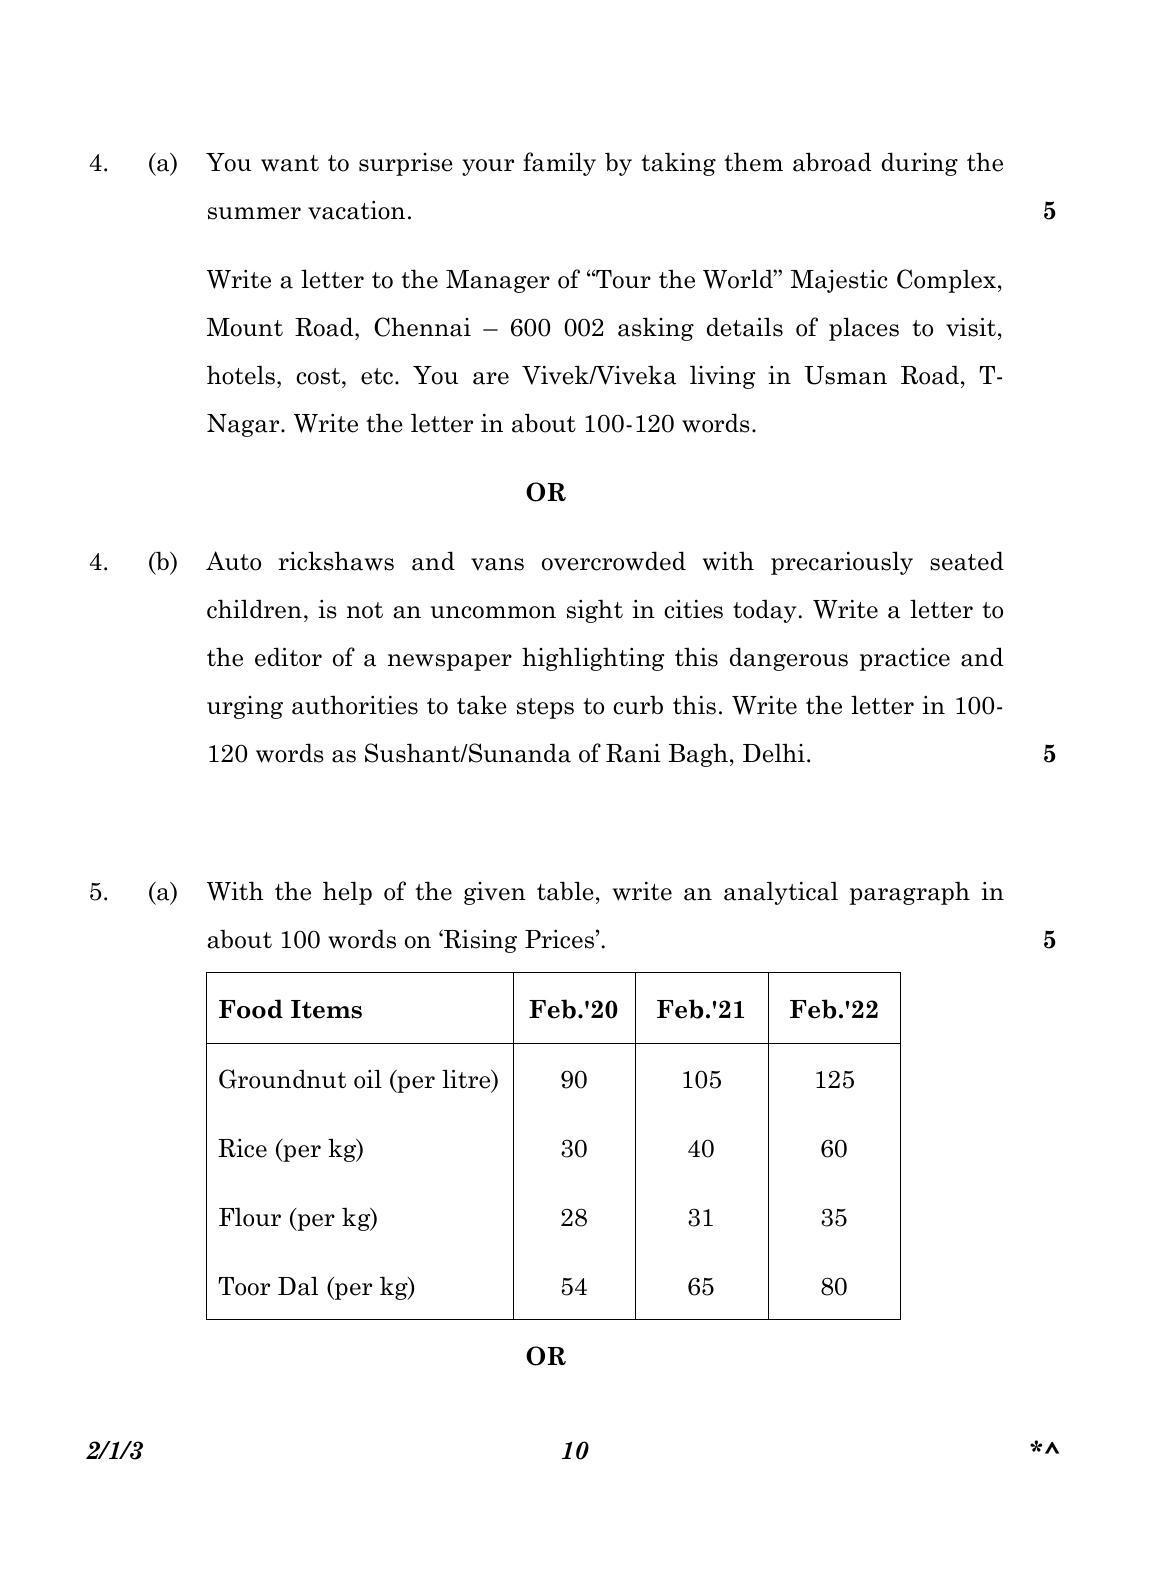 CBSE Class 10 2-1-3_English Language And Literature 2023 Question Paper - Page 10